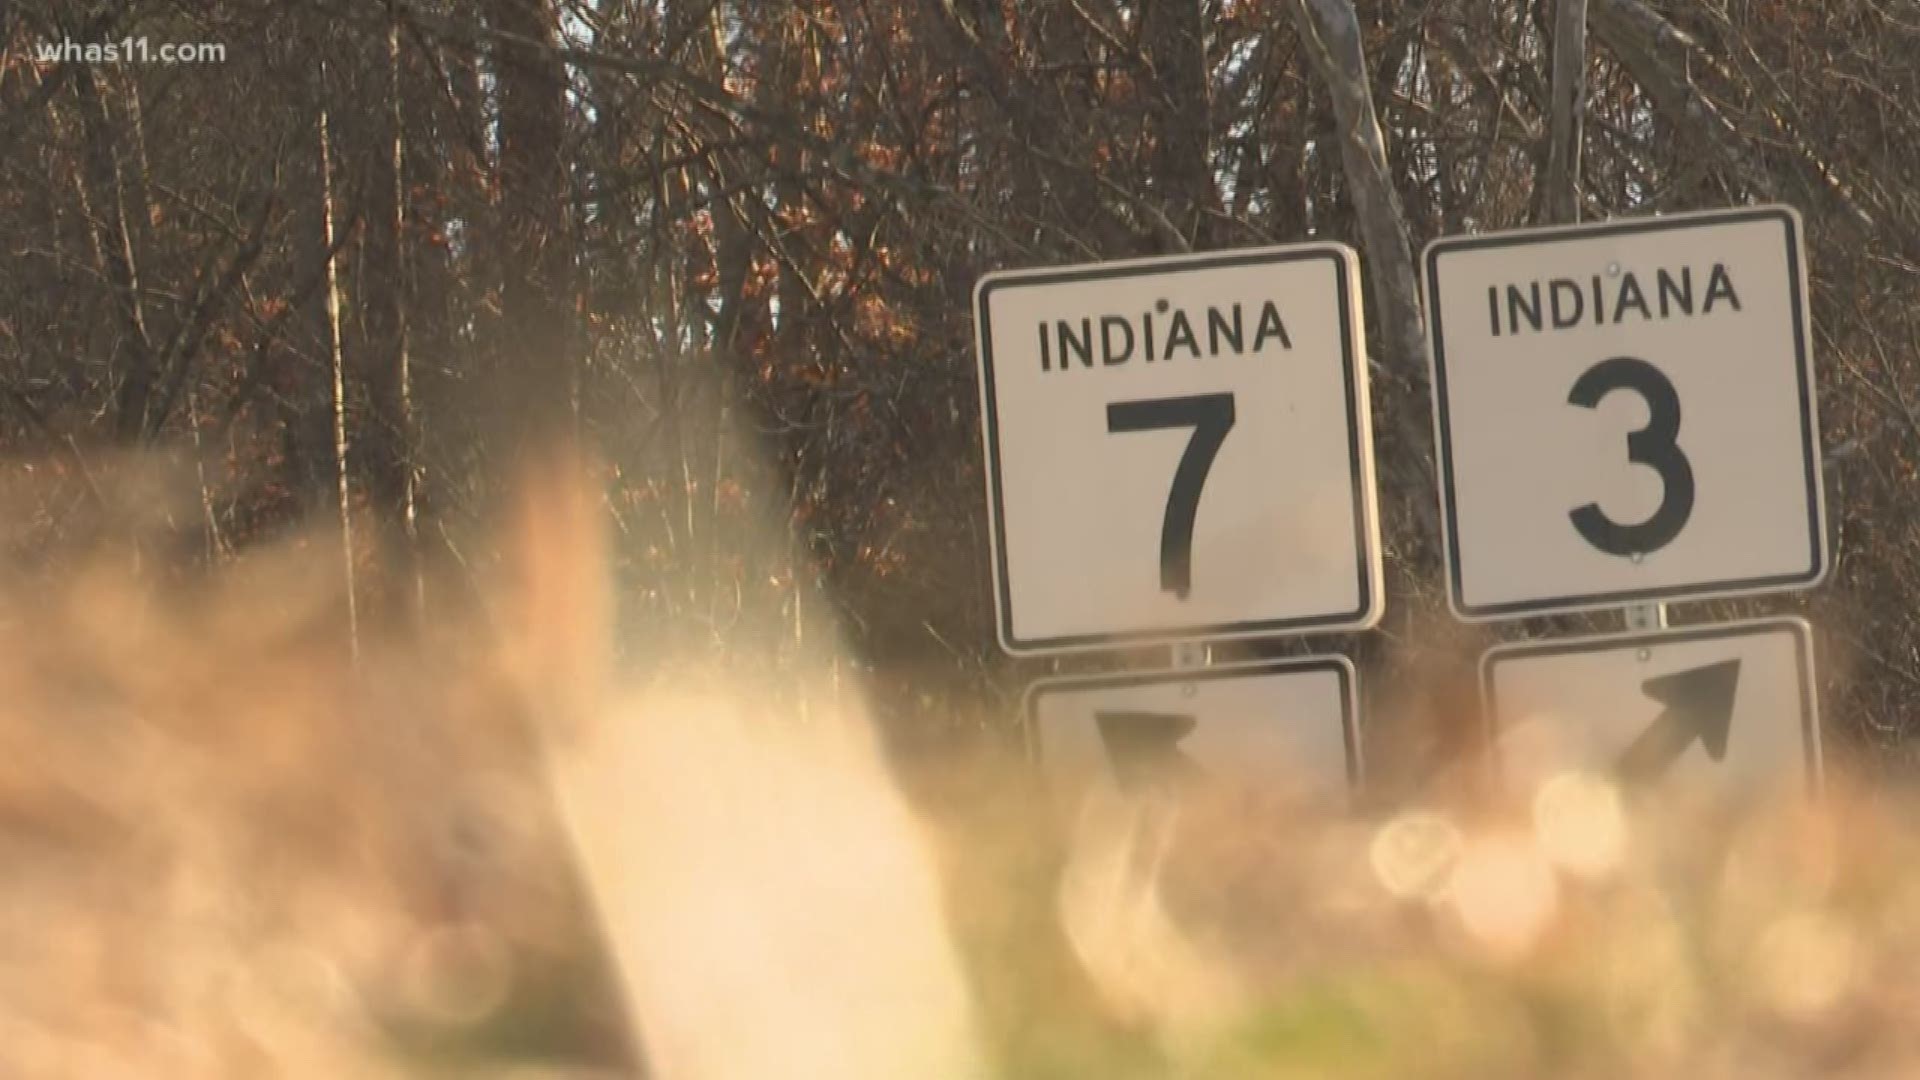 According to Indiana State police, no students were on the bus at the time of the crash.